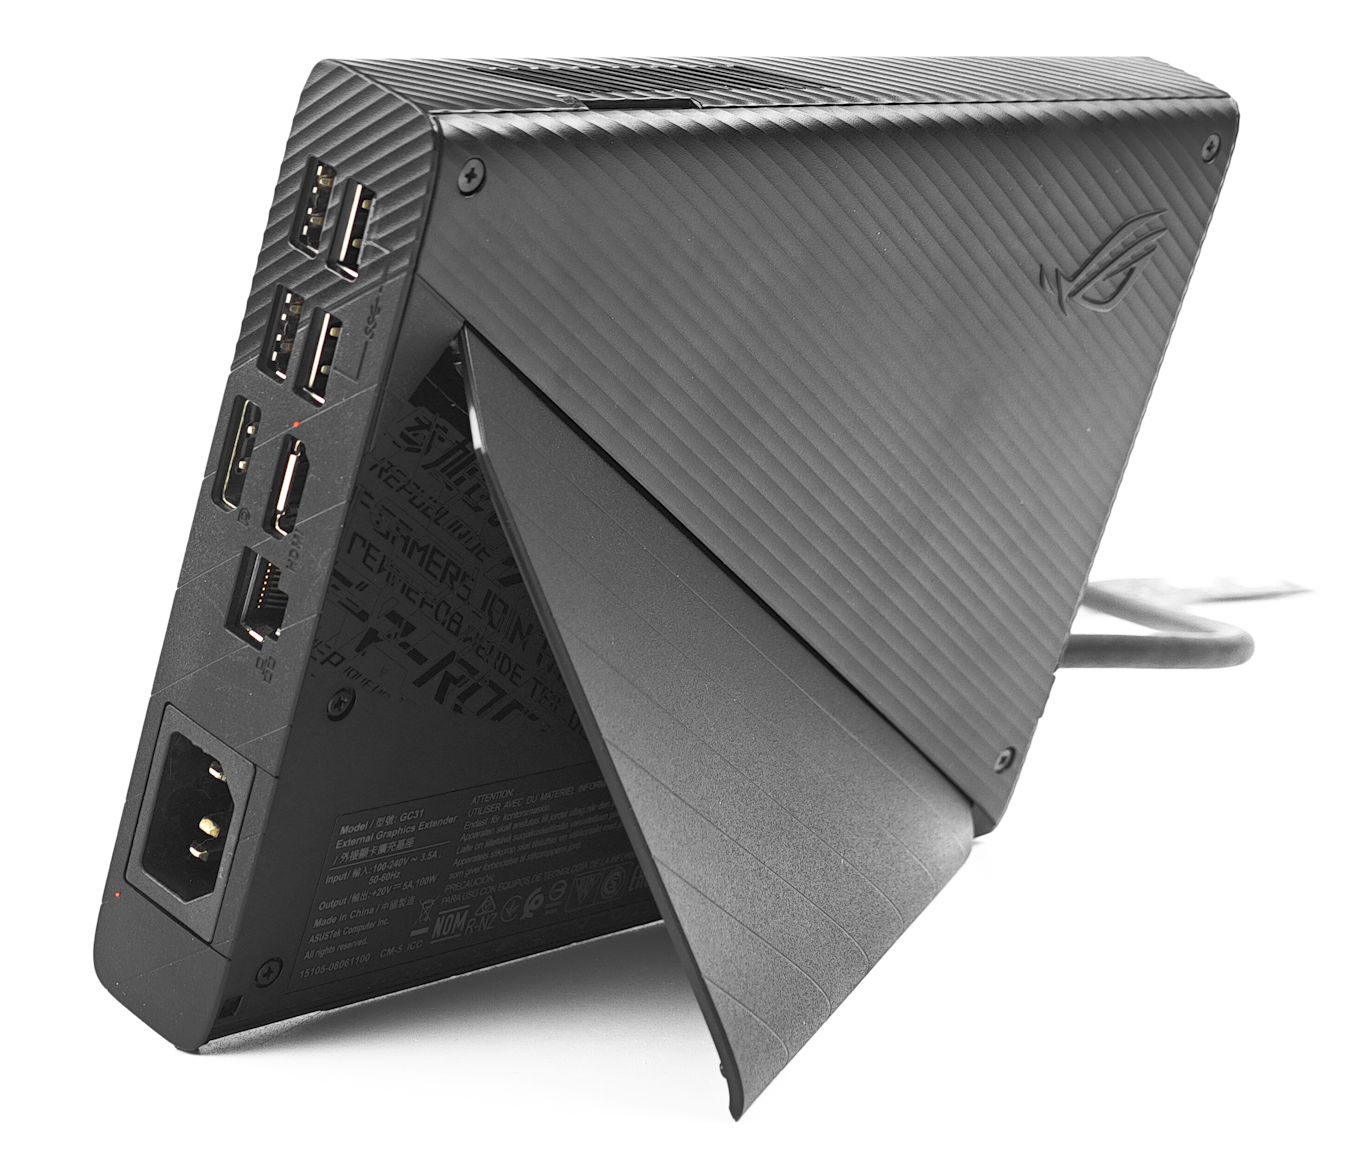 ASUS ROG Ally Gaming Console